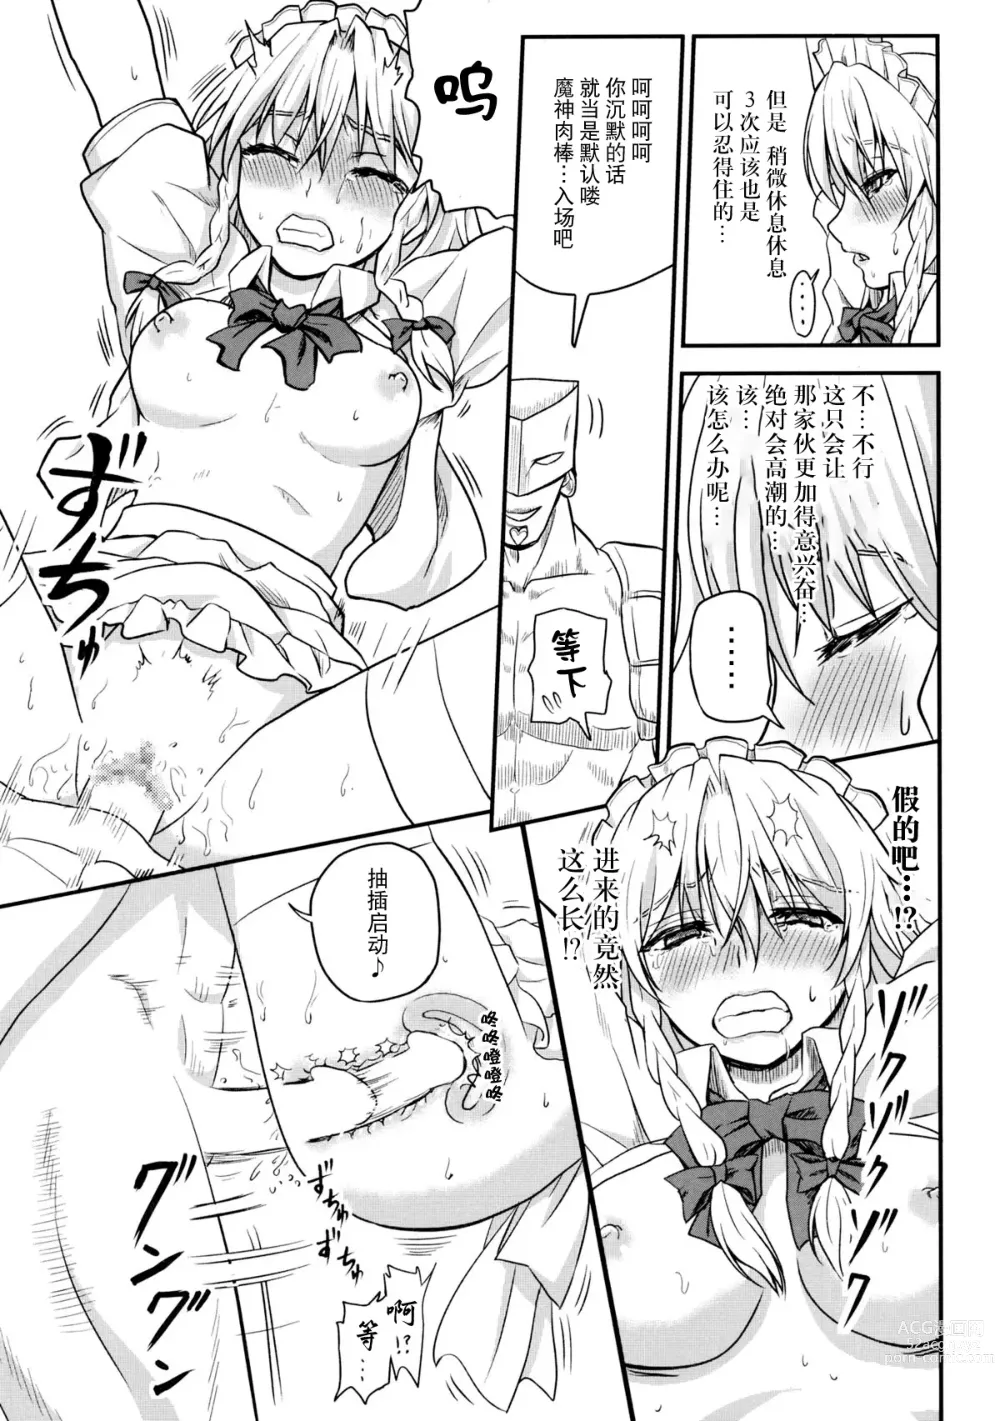 Page 6 of doujinshi D4C continue